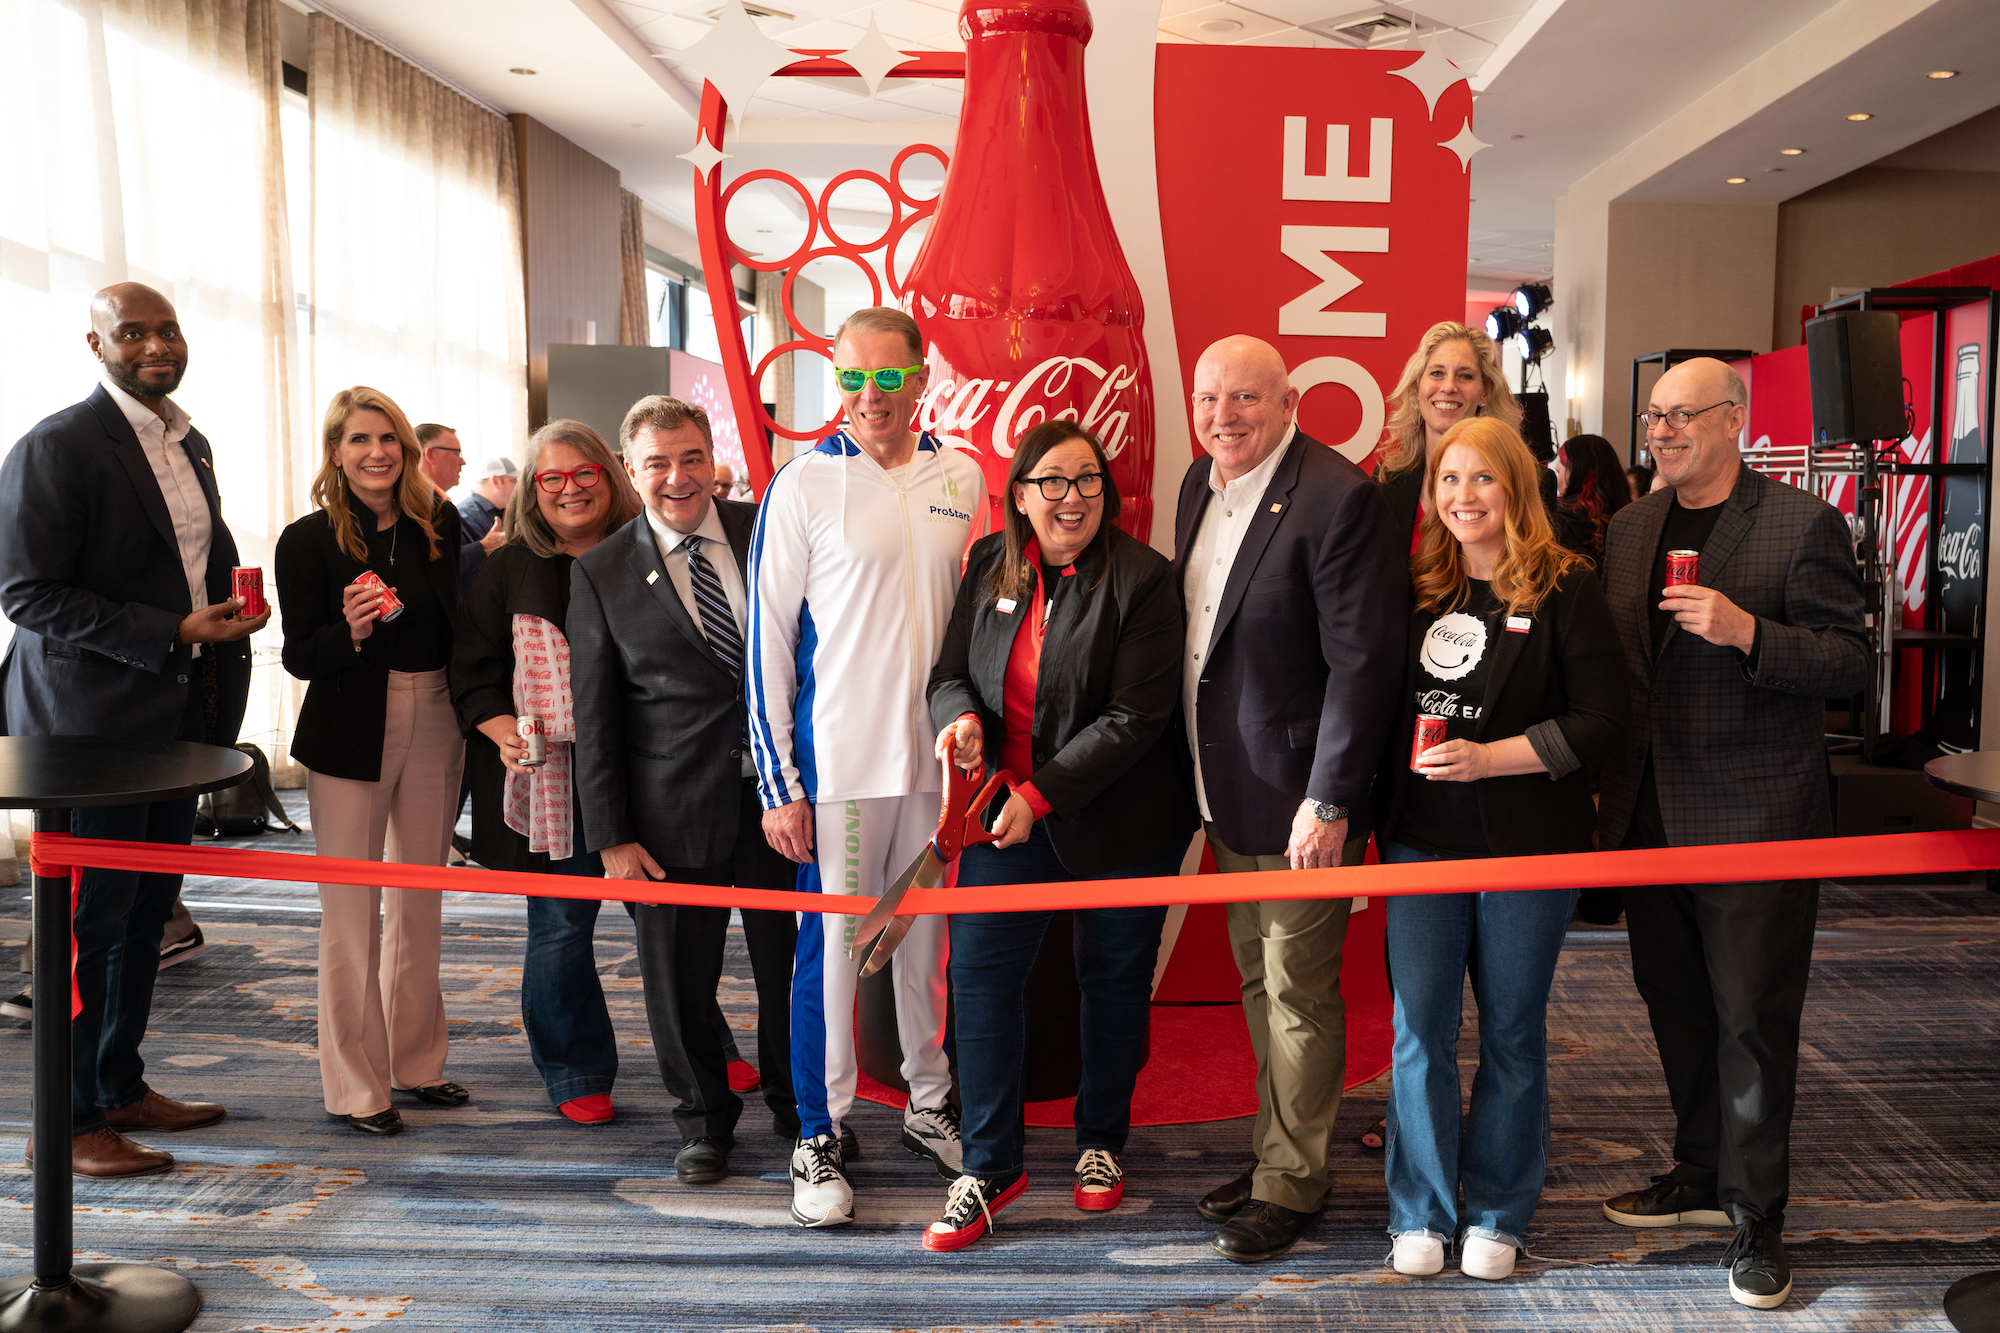 Paula Weeks of Coca-Cola, Sean Beard, Chair of the NRAEF Board of Trustees, Rob Gifford, President of NRAEF, and other attendees at the Coca-Cola Lounge ribbon cutting.